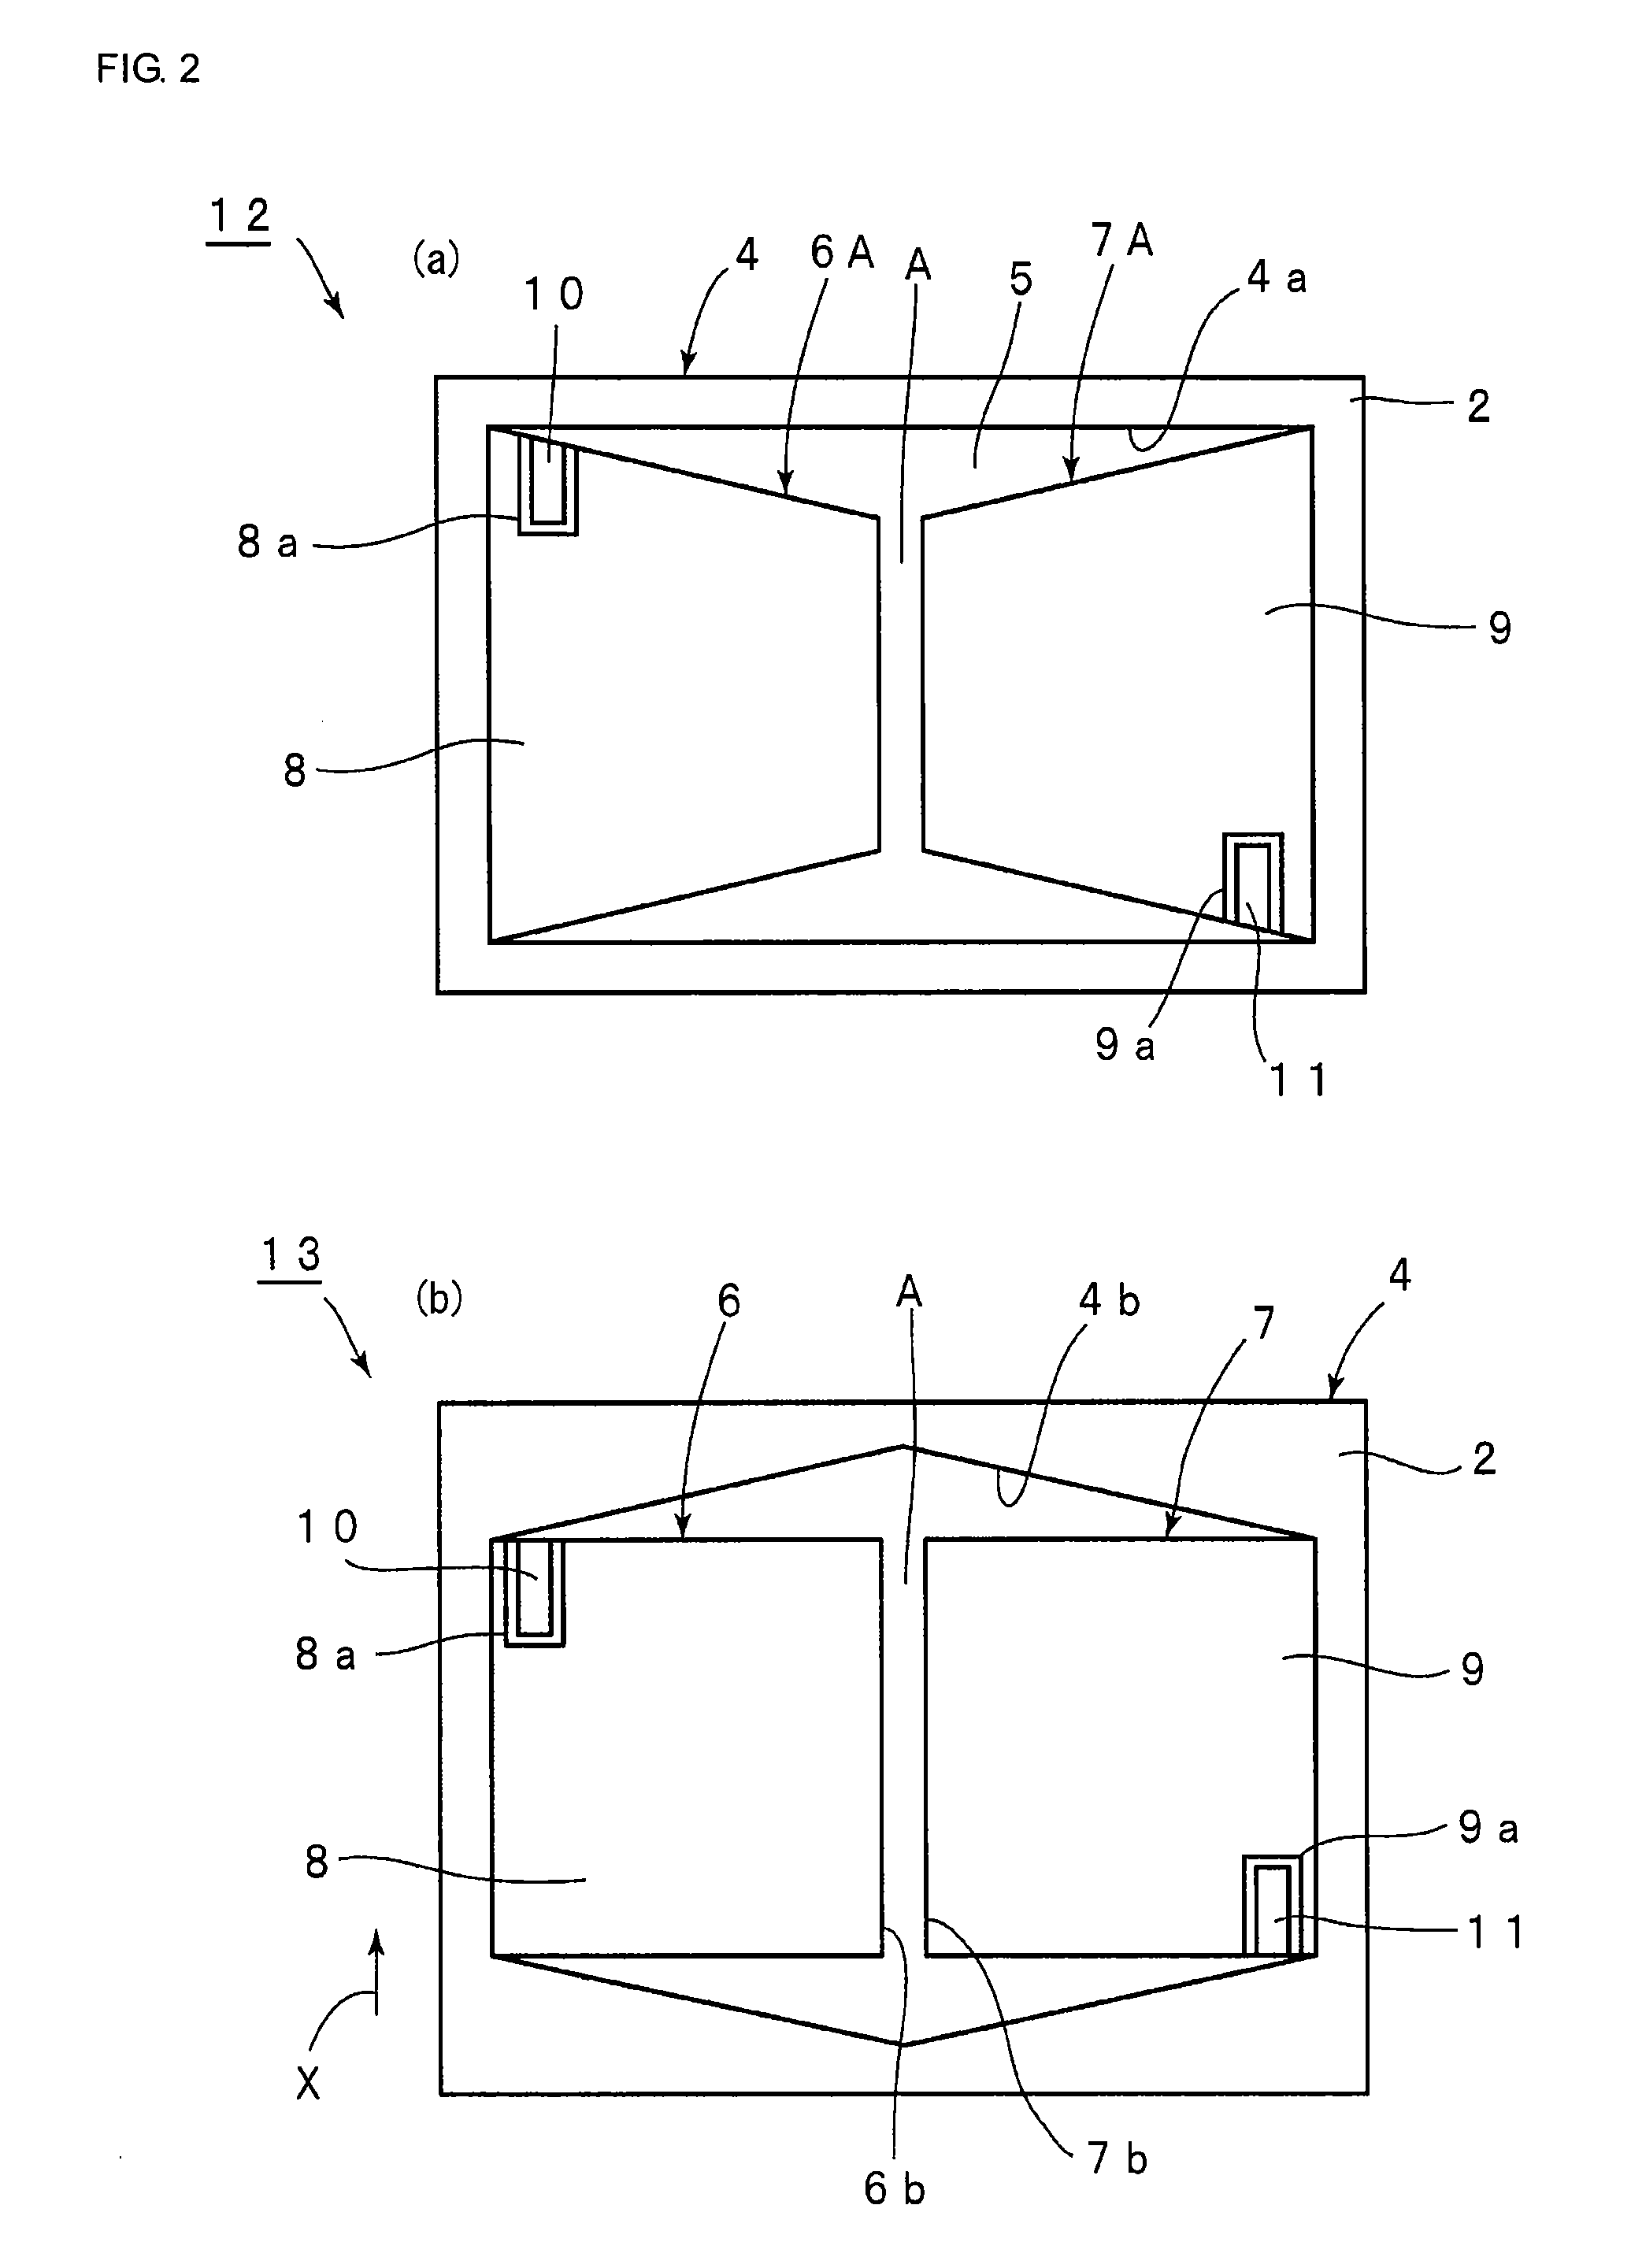 Electroacoustic Transducer